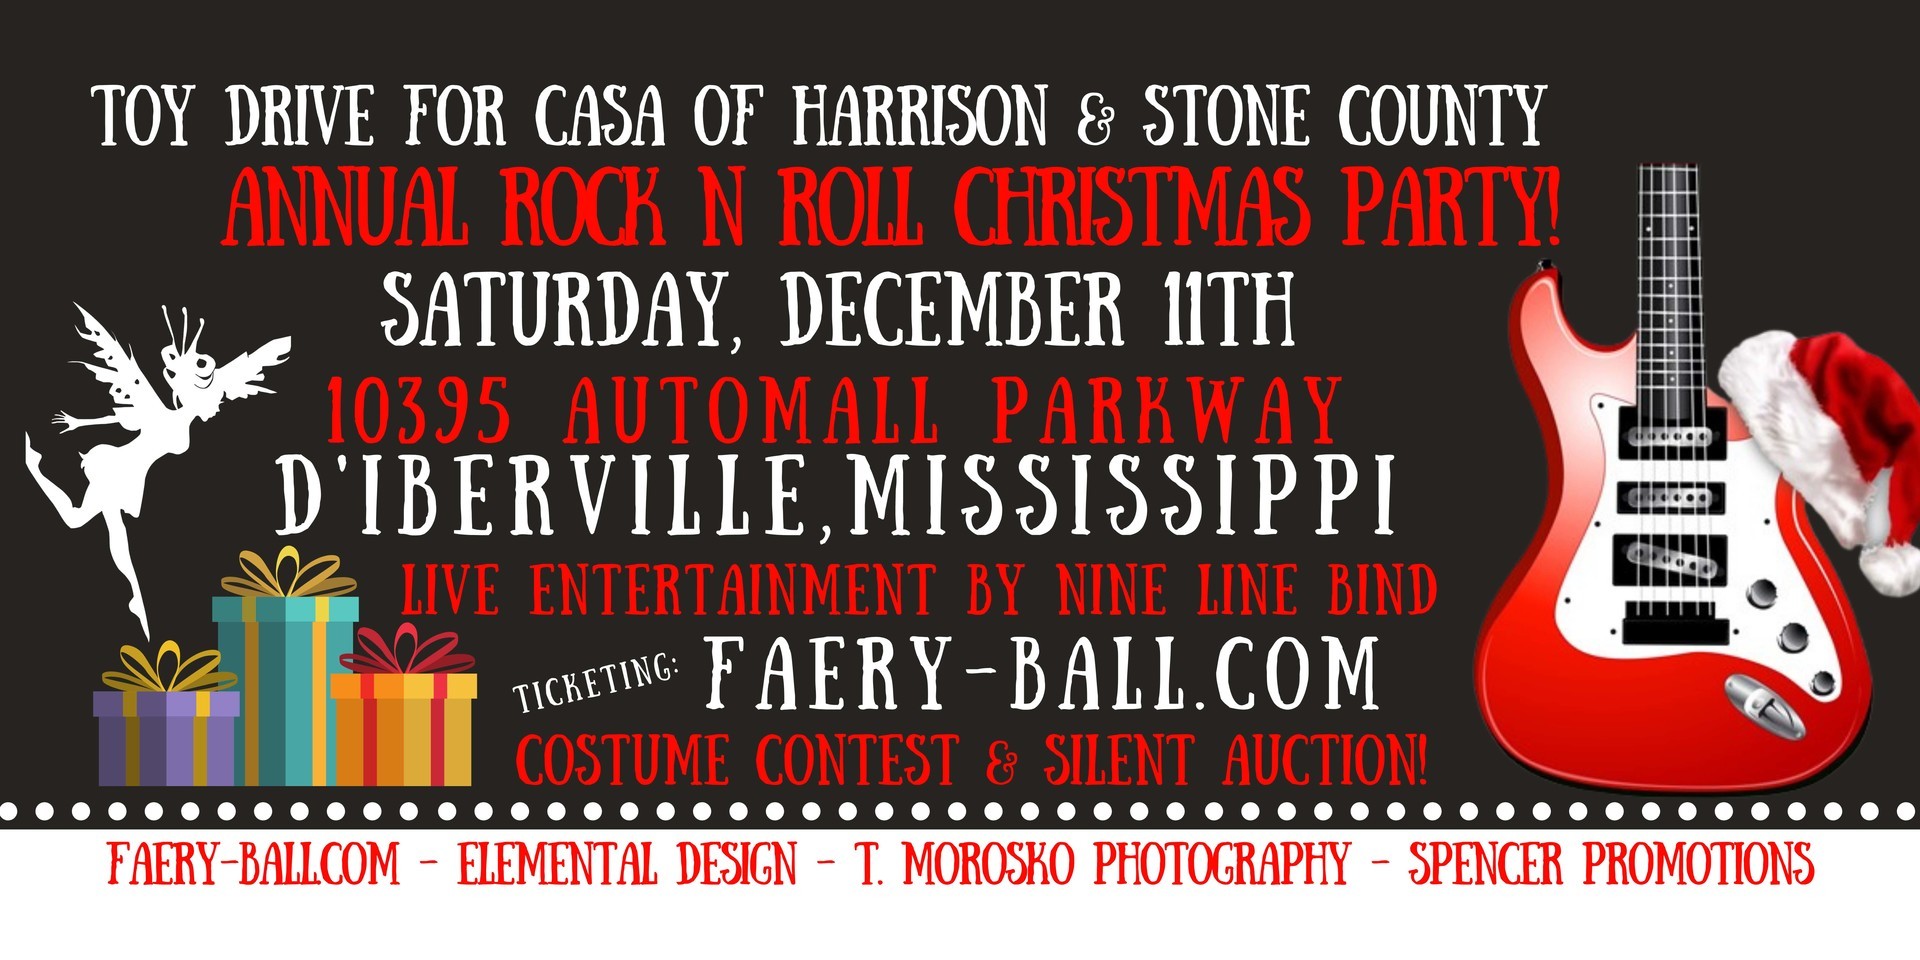 Annual Rock N Roll Fantasy Costume Christmas Party - CASA fundraiser, D'Iberville, Mississippi, United States